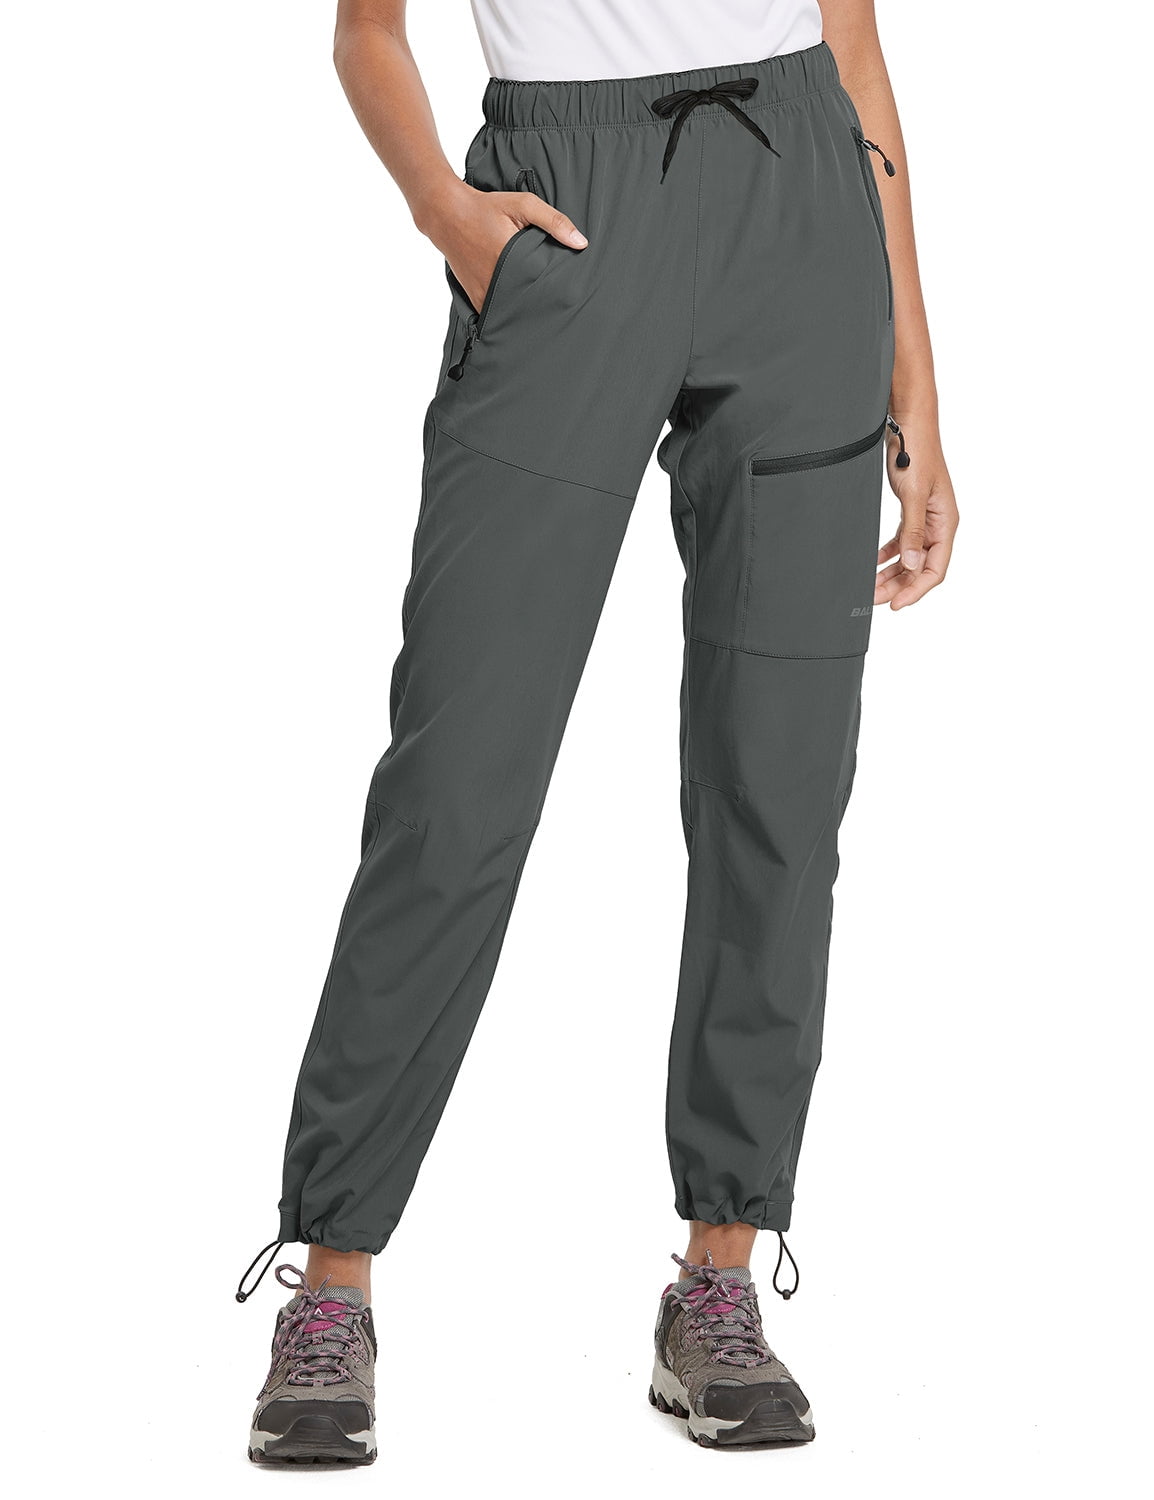 BALEAF Cargo Pants For Women Quick Dry Water Resistant With 4